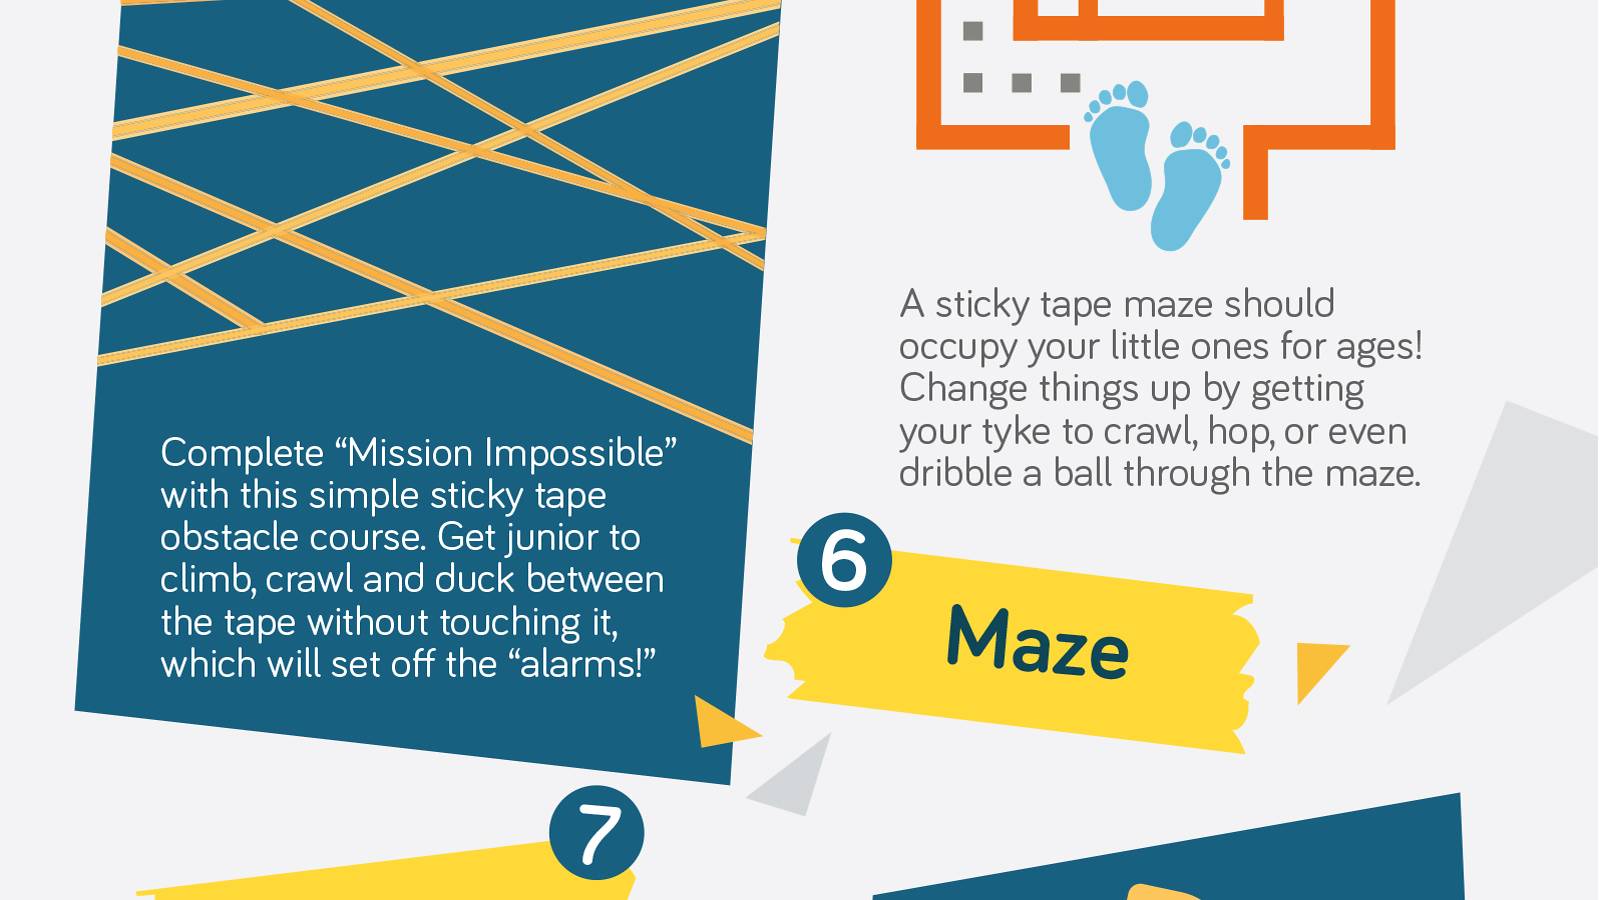 Tots-10-creative-sticky-tape-toddler-activities-[Infographic]_05